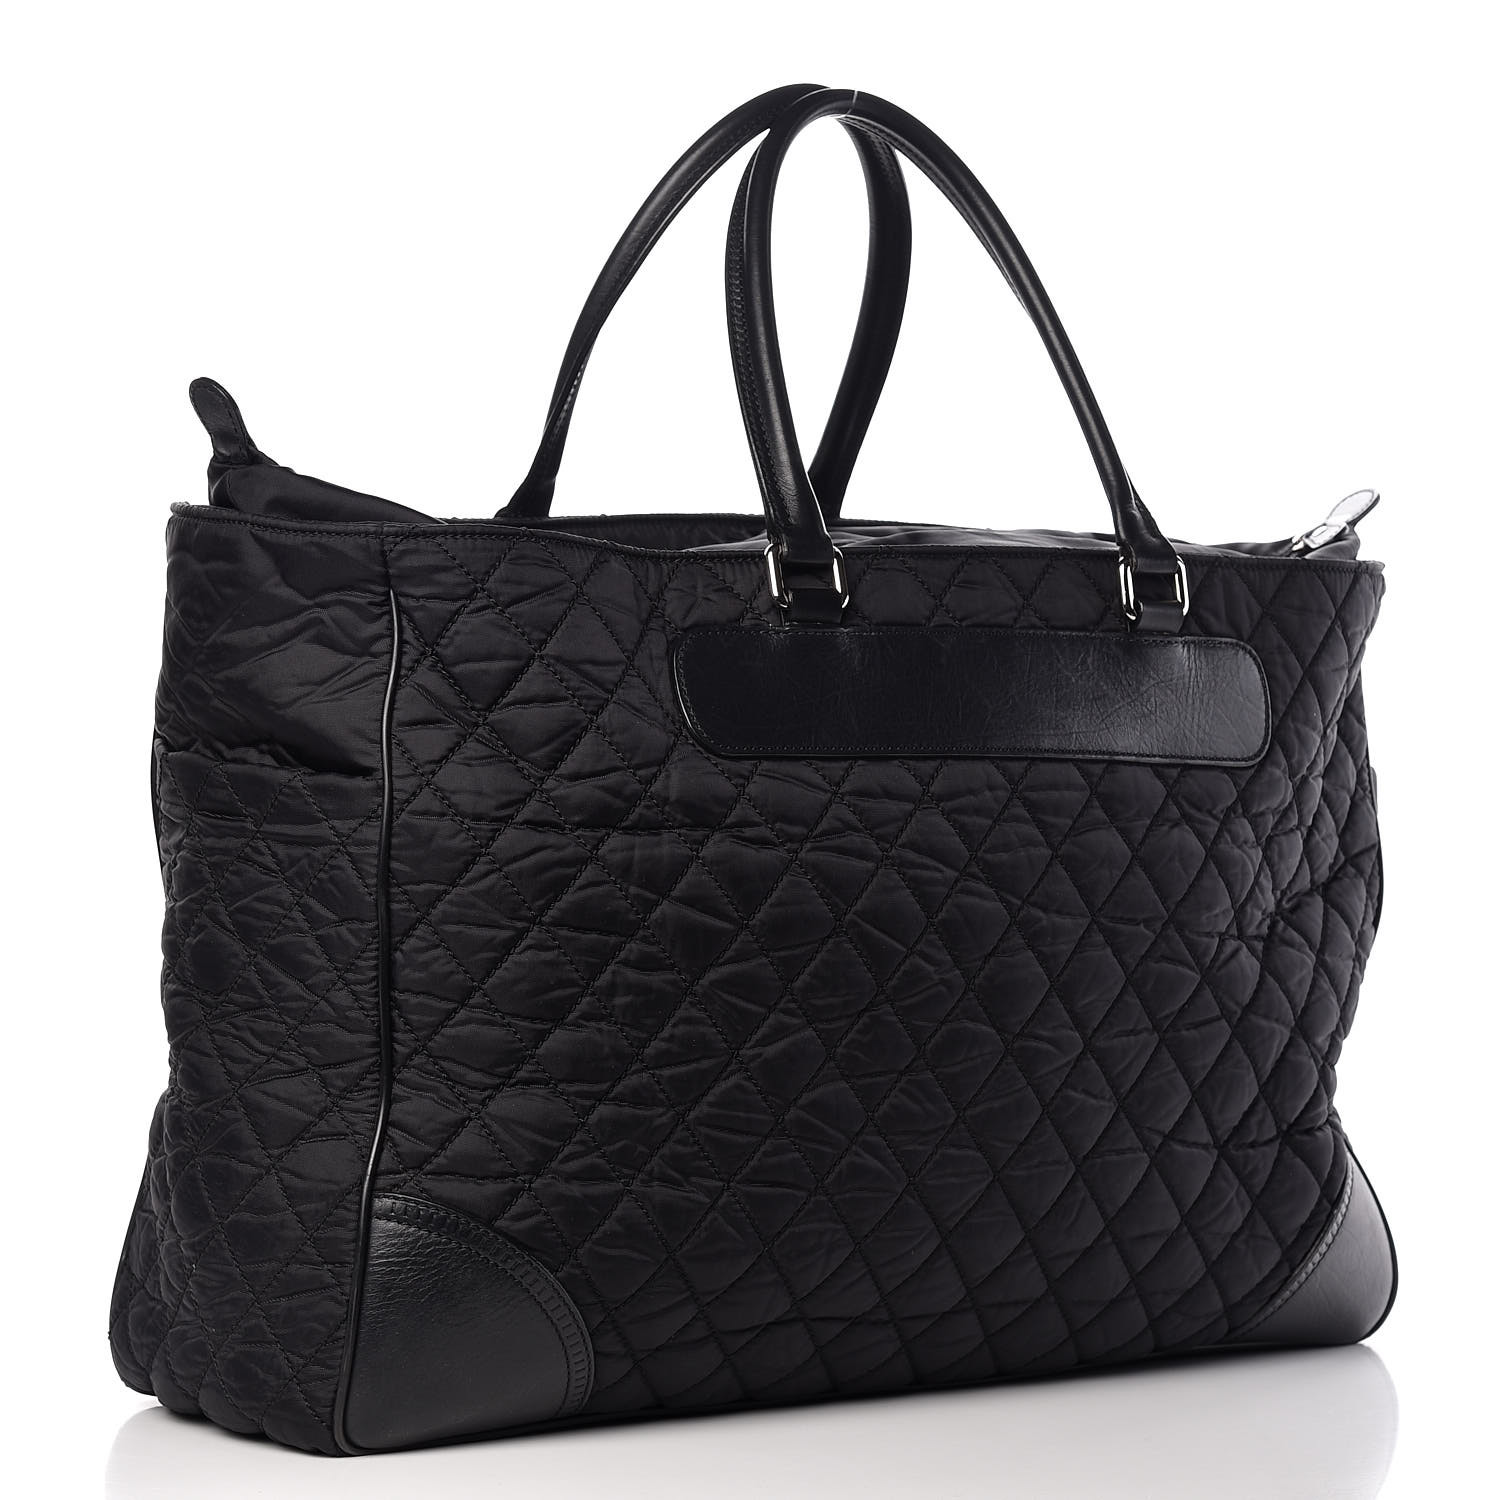 CHANEL Nylon Quilted Calfskin Large CC Tote Bag Black 356218